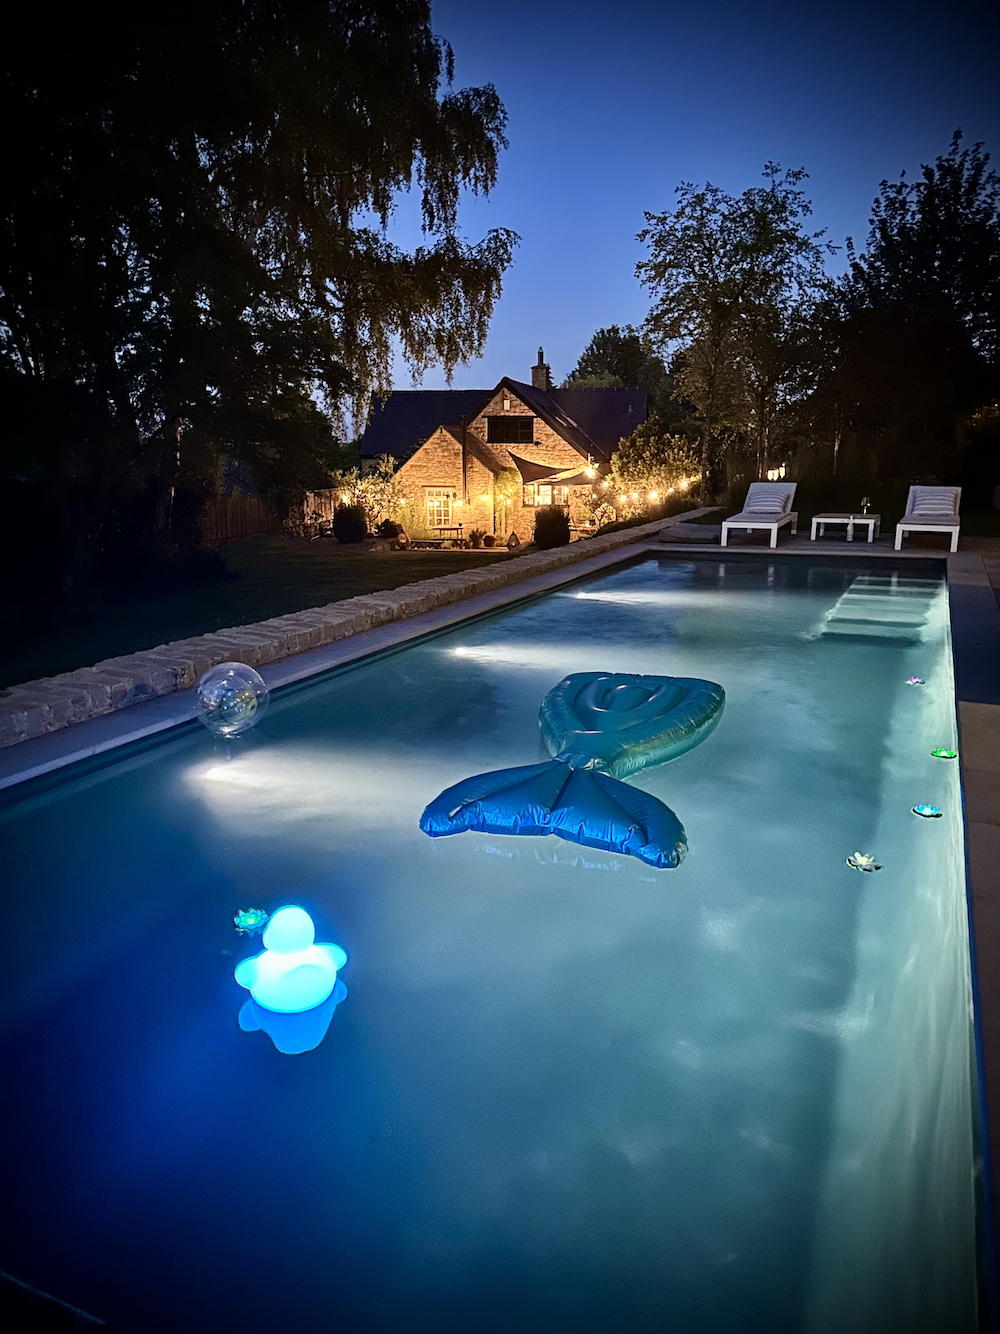 Swimming pool by night in poolscape garden with inflatables floats near by Soho Farmhouse 